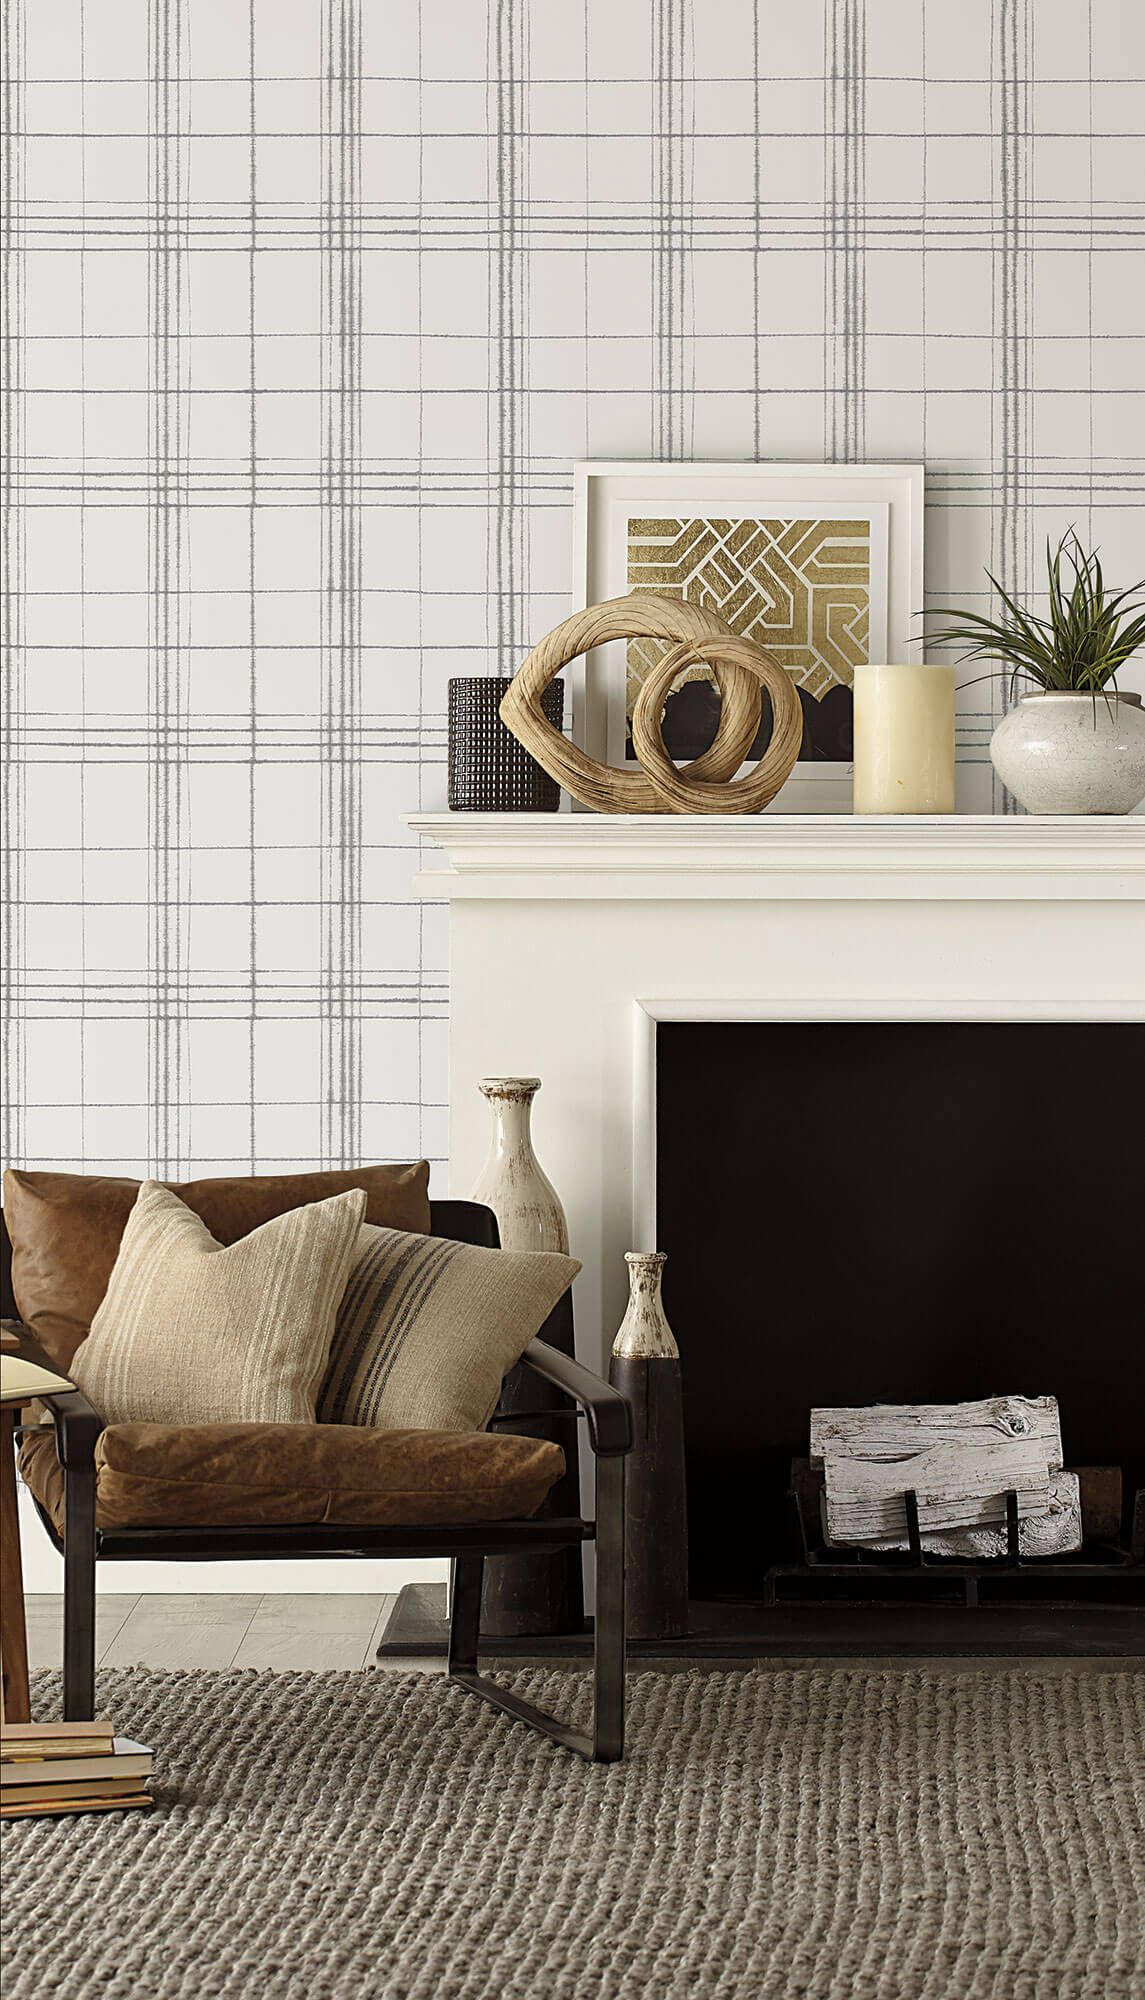 Buy Wallpaper Plaid Sophisticated Beige Plaid Wallpaper Online in India   Etsy